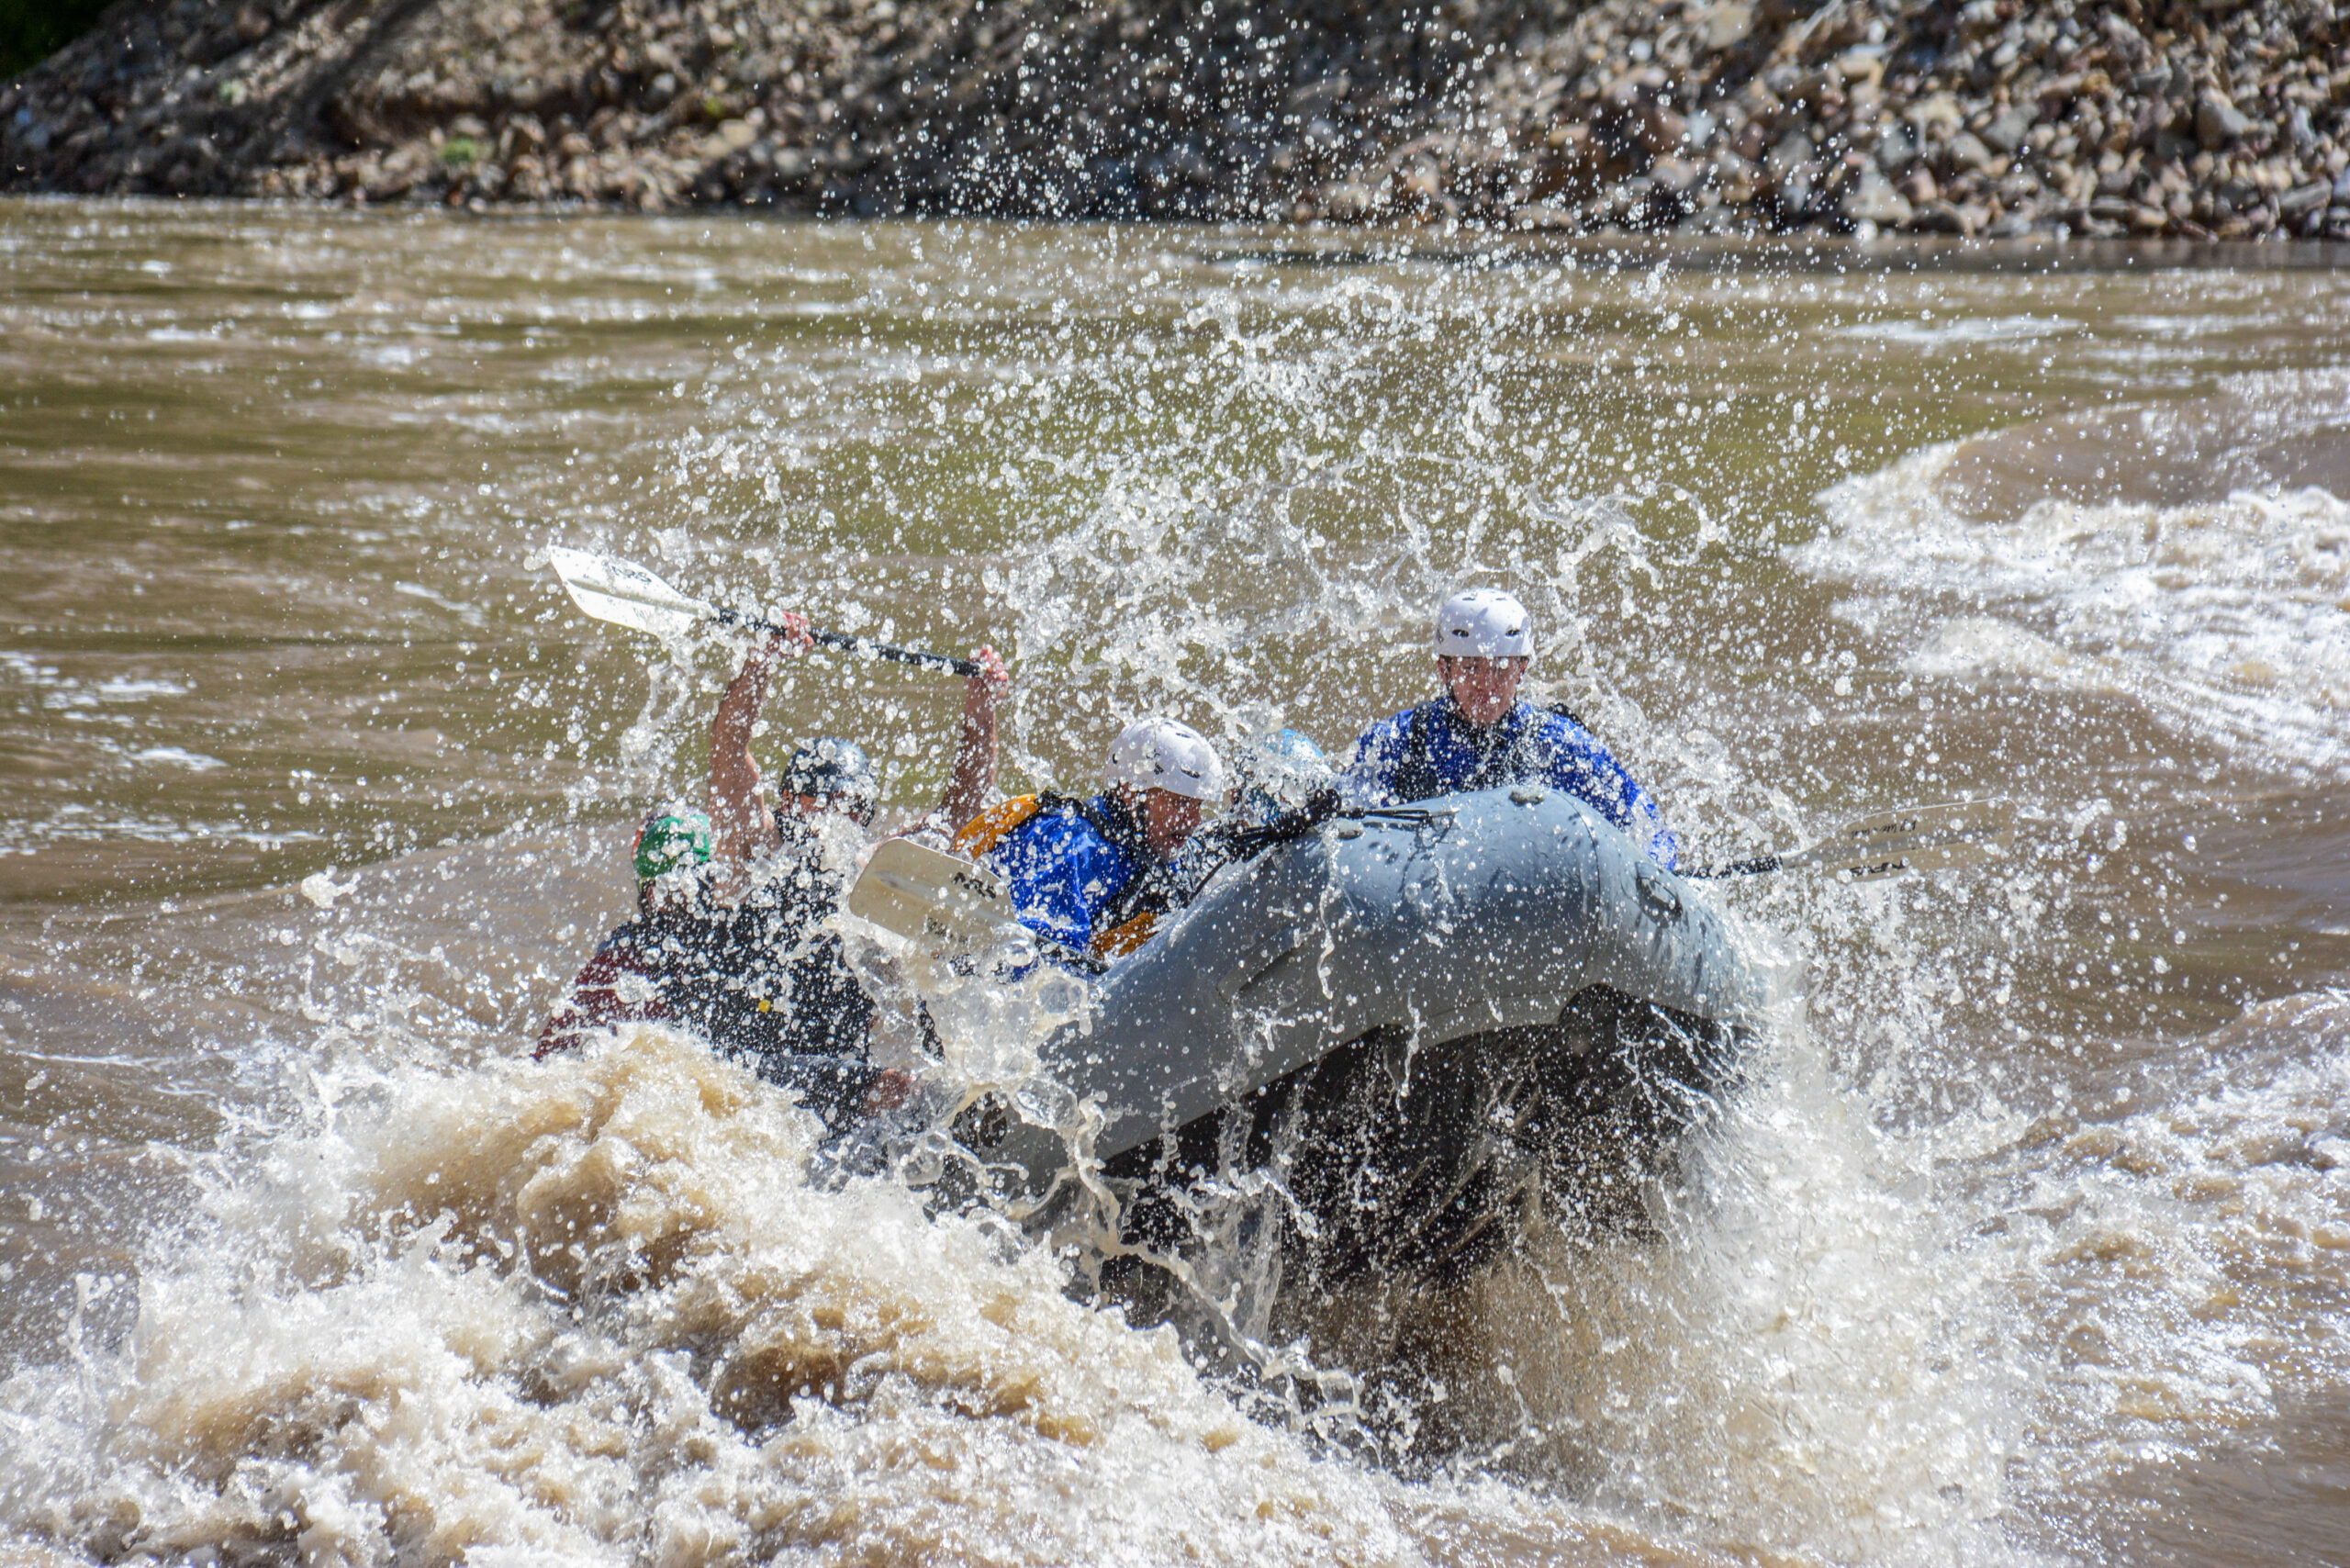 Boat flies above river during Shoshone Rapids Half-Day rafting trip